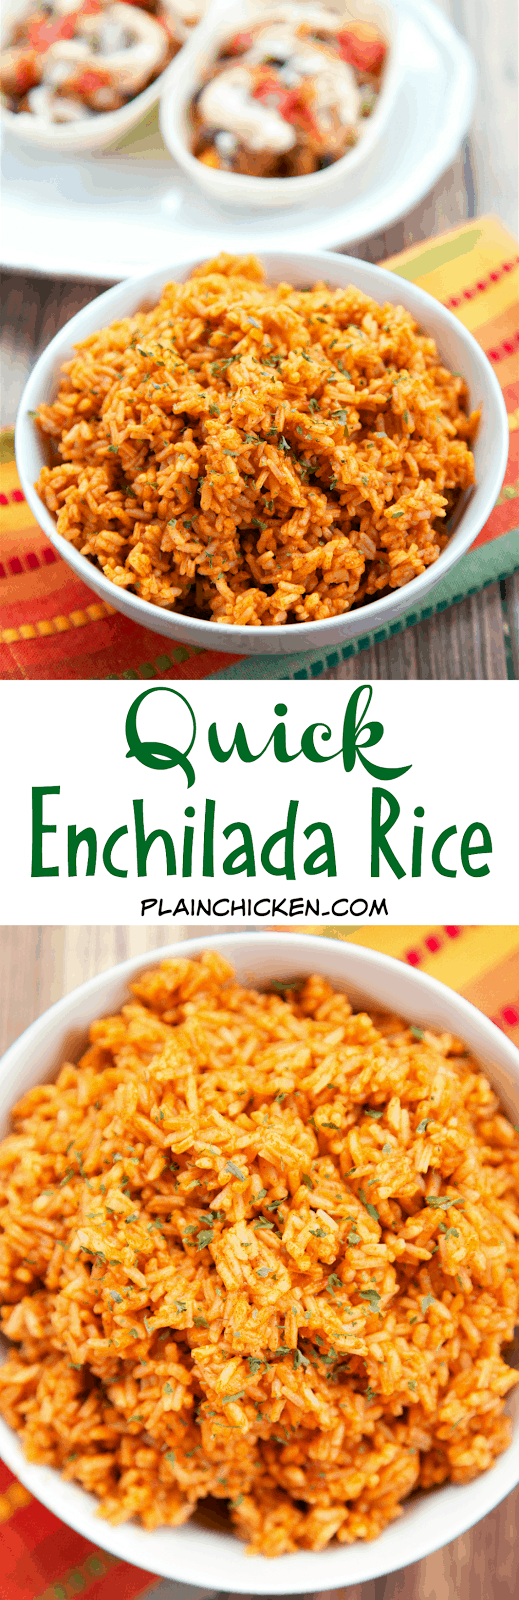 Quick Enchilada Rice - only 2 ingredients! Ready in 5 minutes! Tastes just like the Mexican restaurant. We make this all the time!